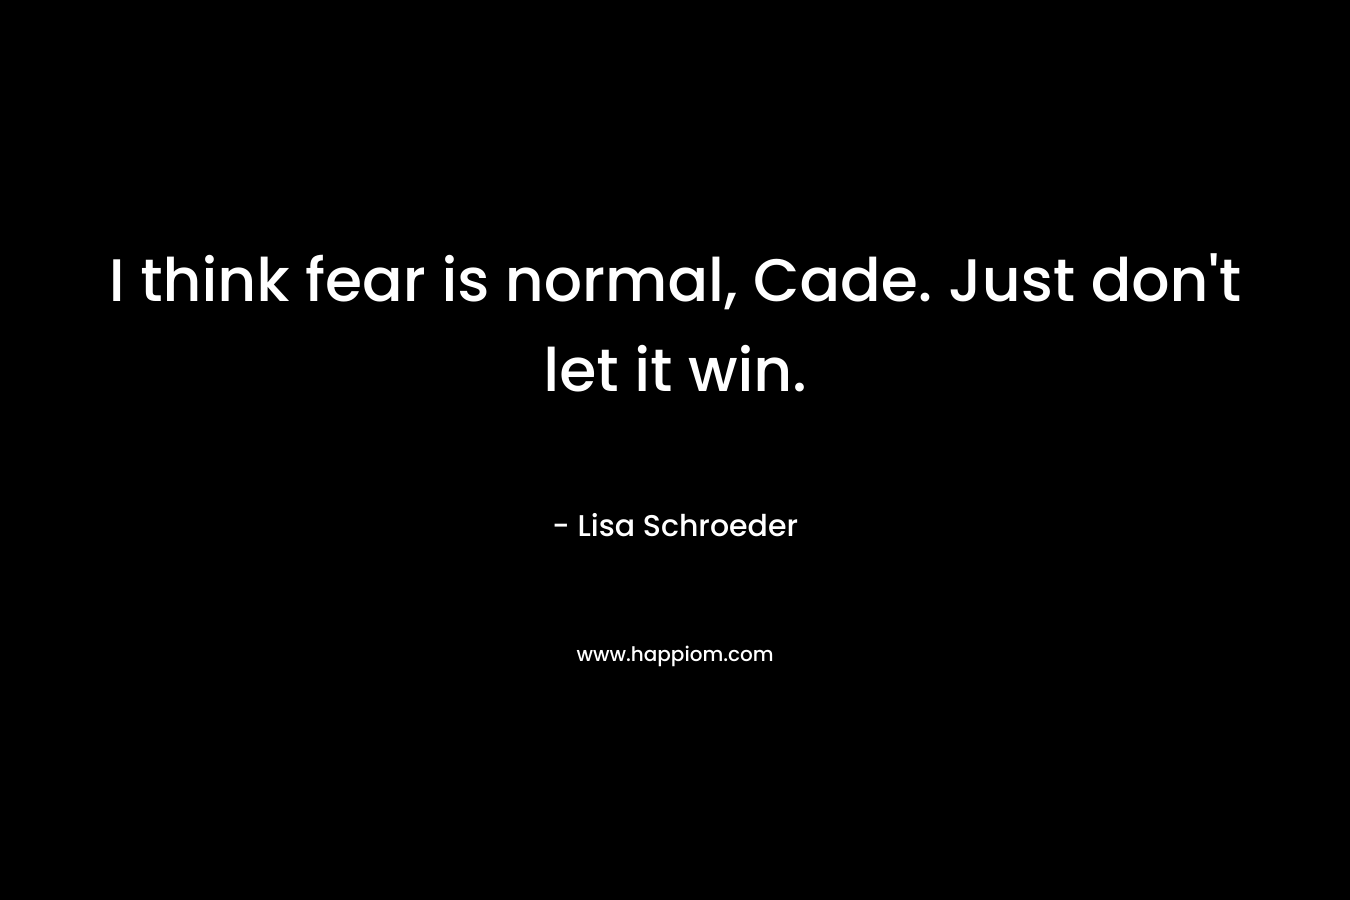 I think fear is normal, Cade. Just don't let it win.